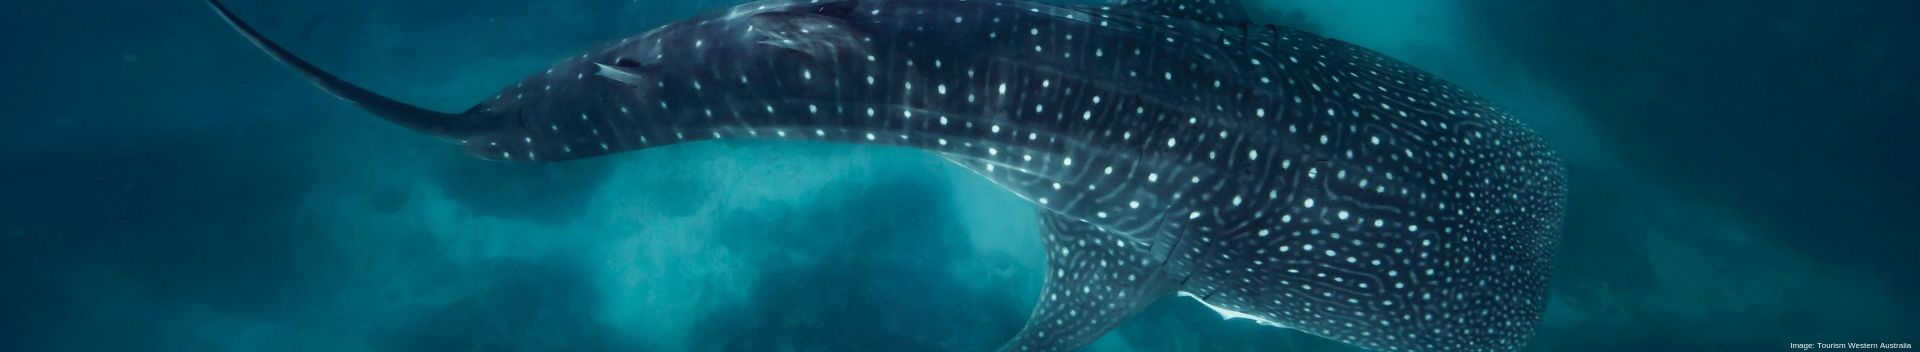 Swimming with Whale Sharks at Ningaloo Reef